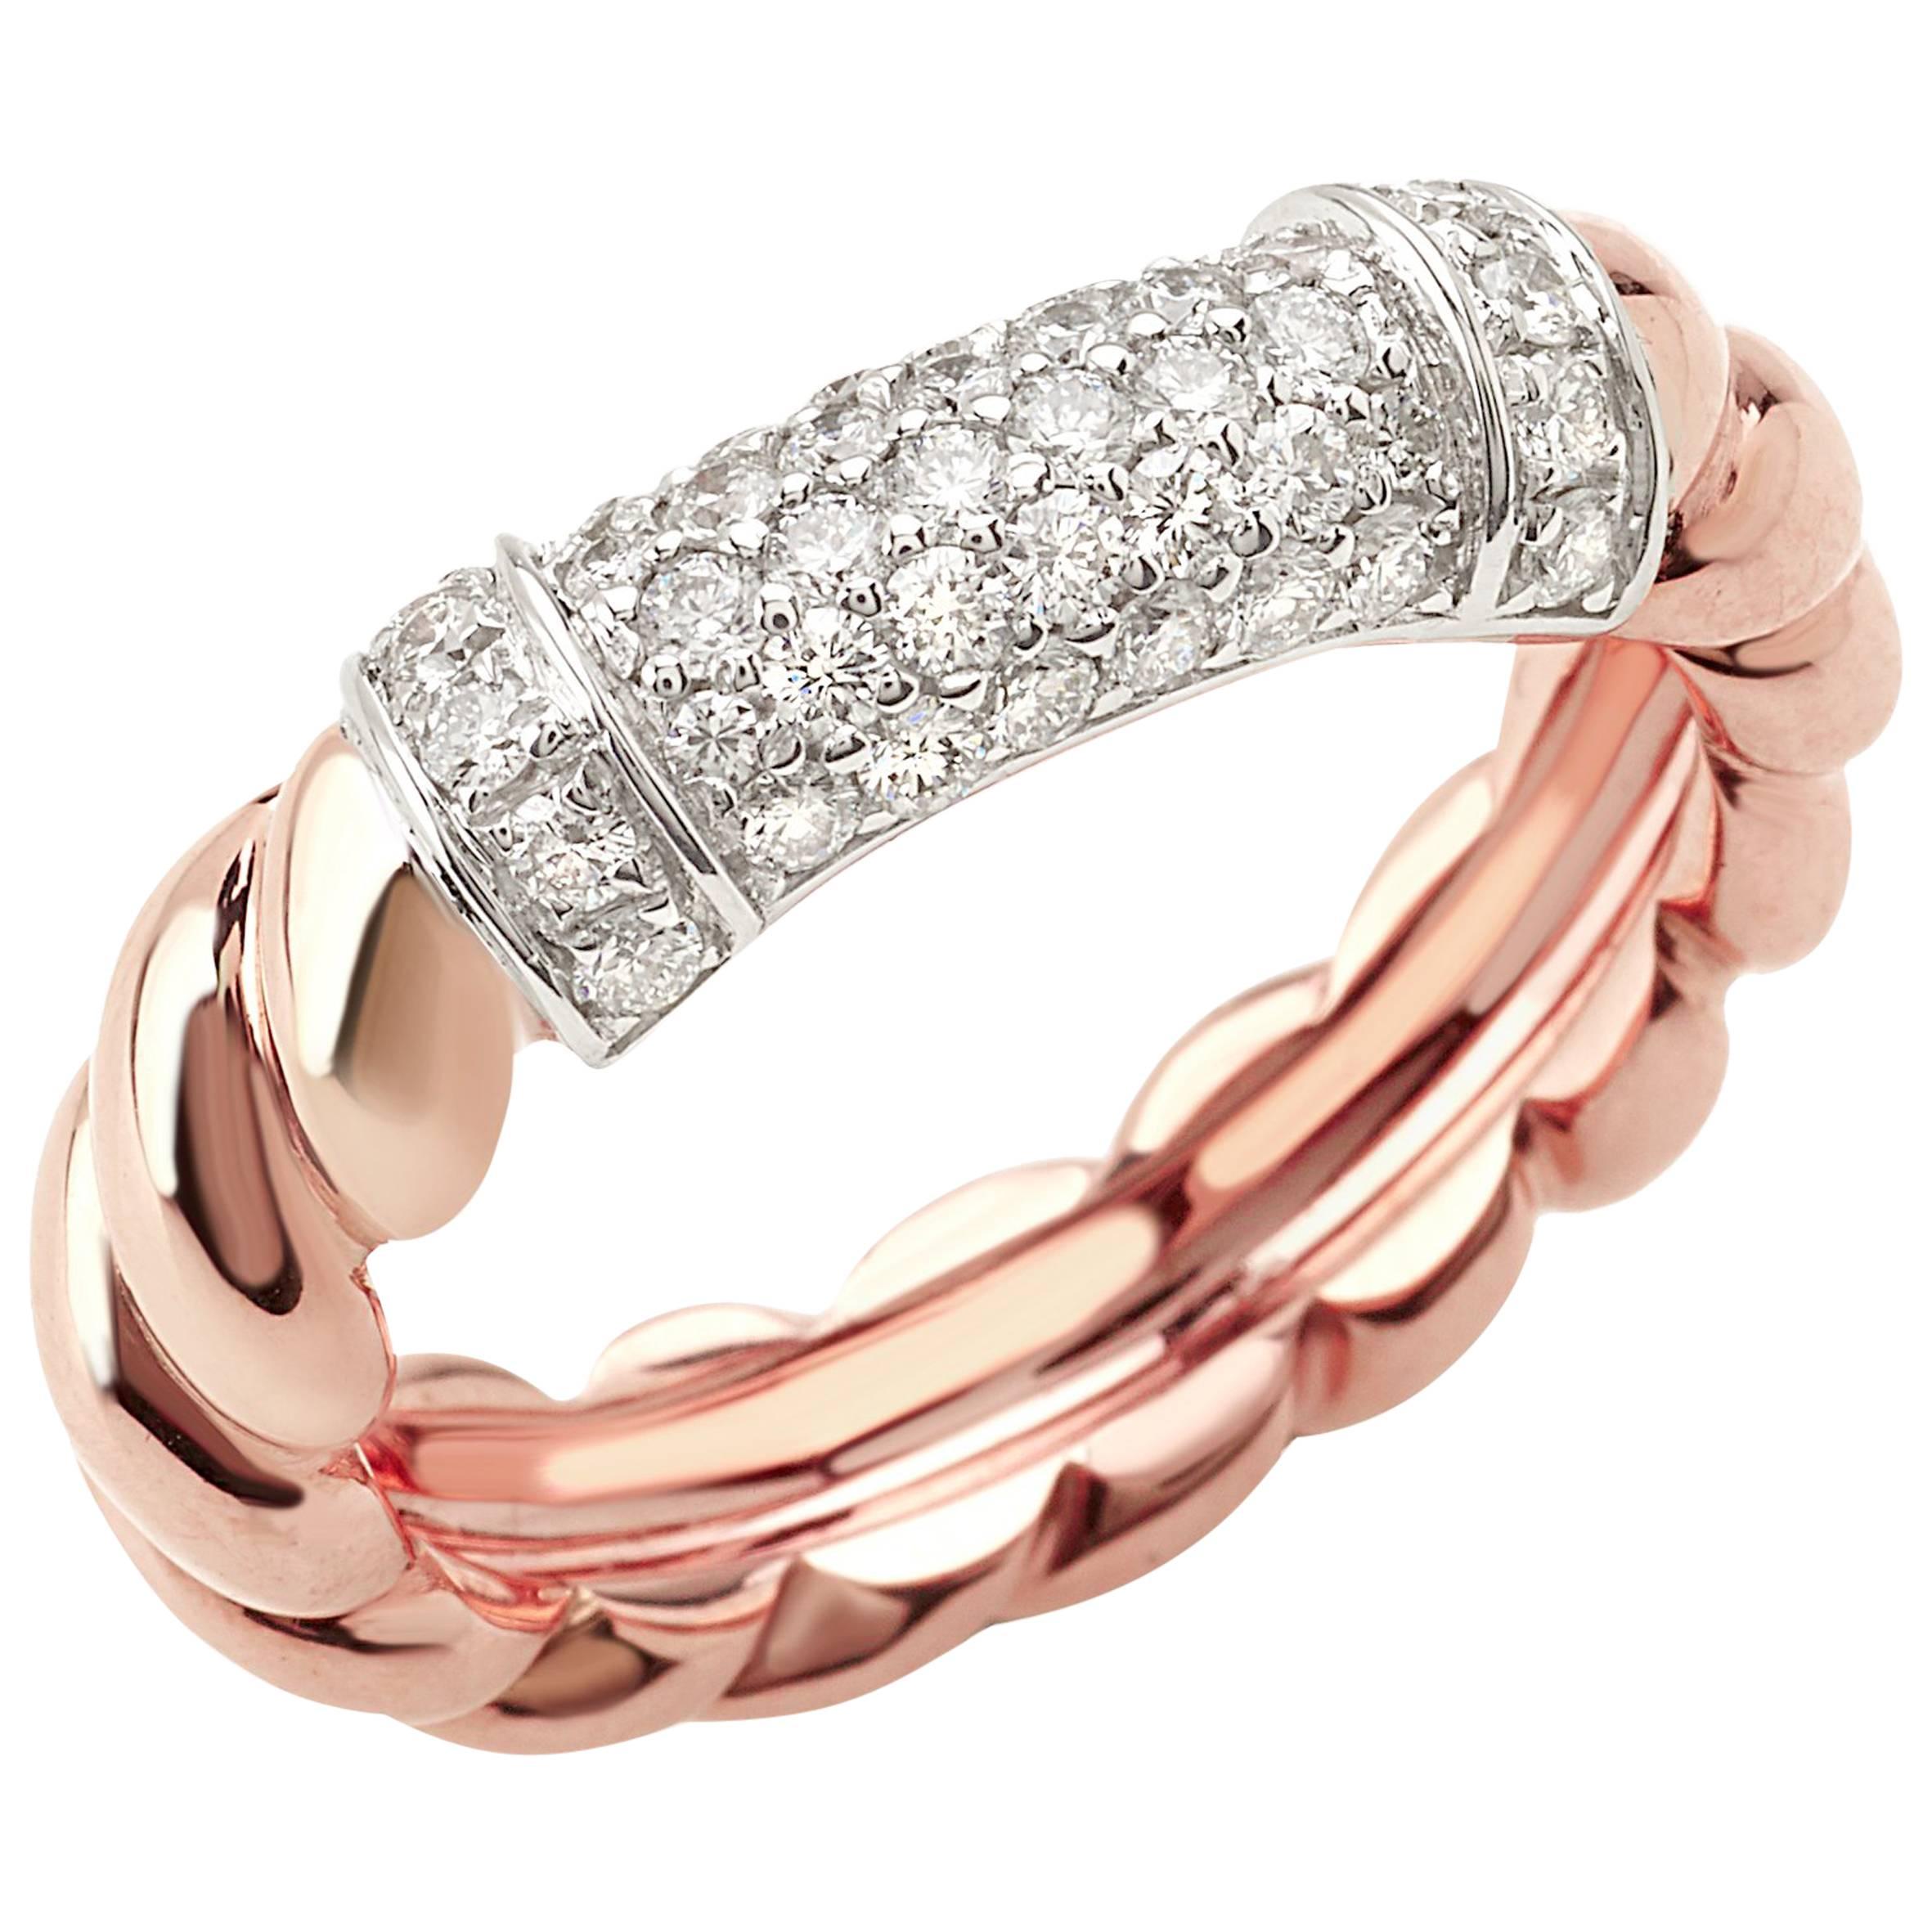 Ring from the Collection "Rope" 18 Karat Rose Gold and Diamonds For Sale